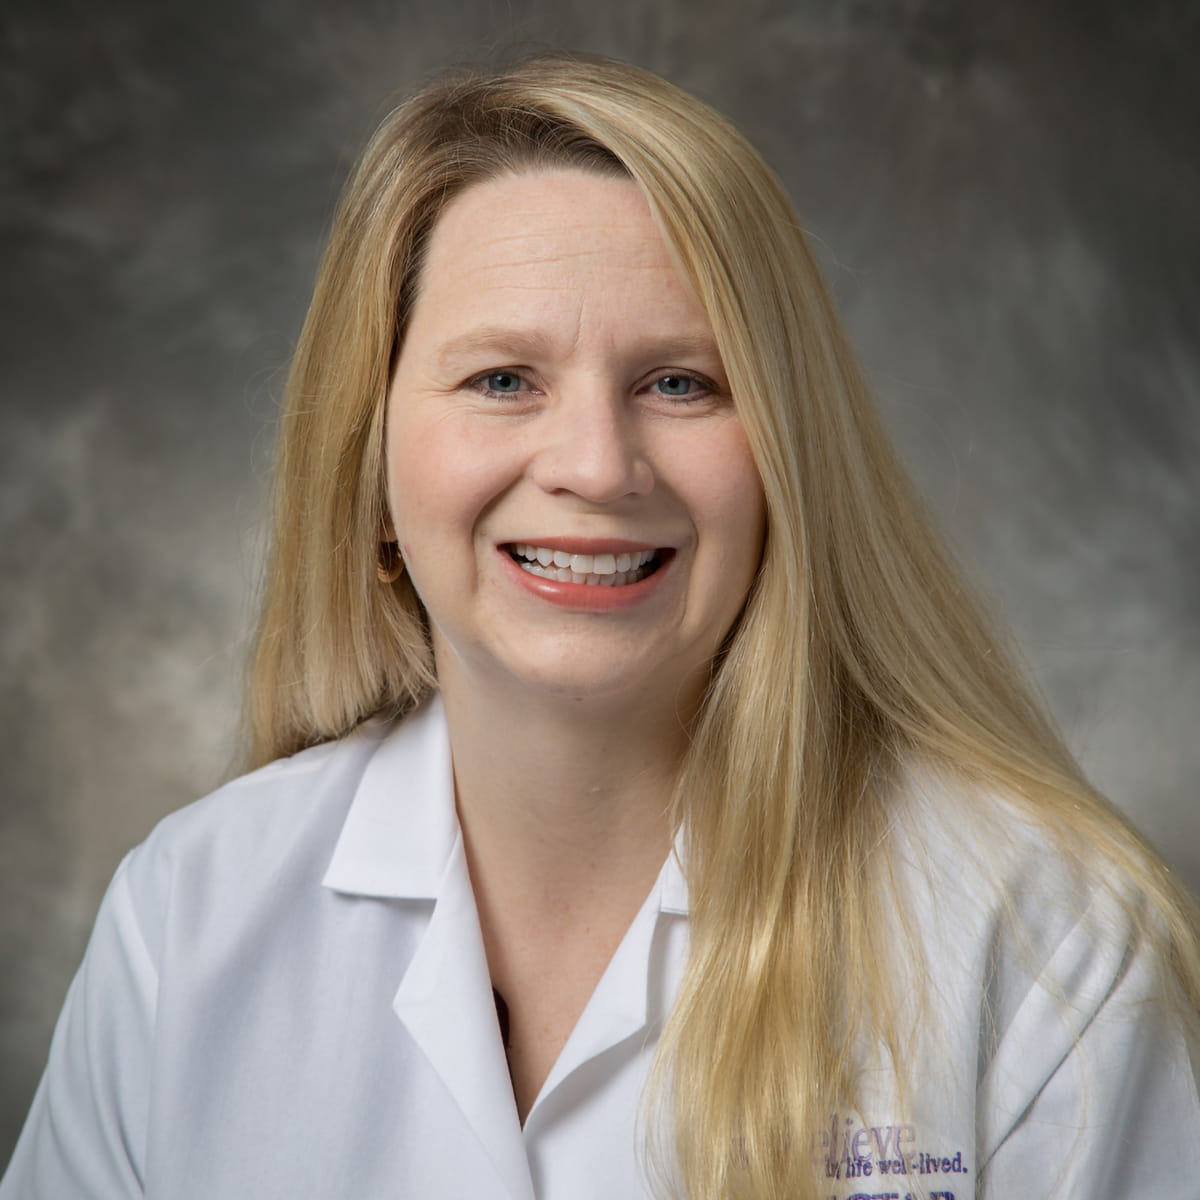 A friendly headshot of Amber Driskell, MD